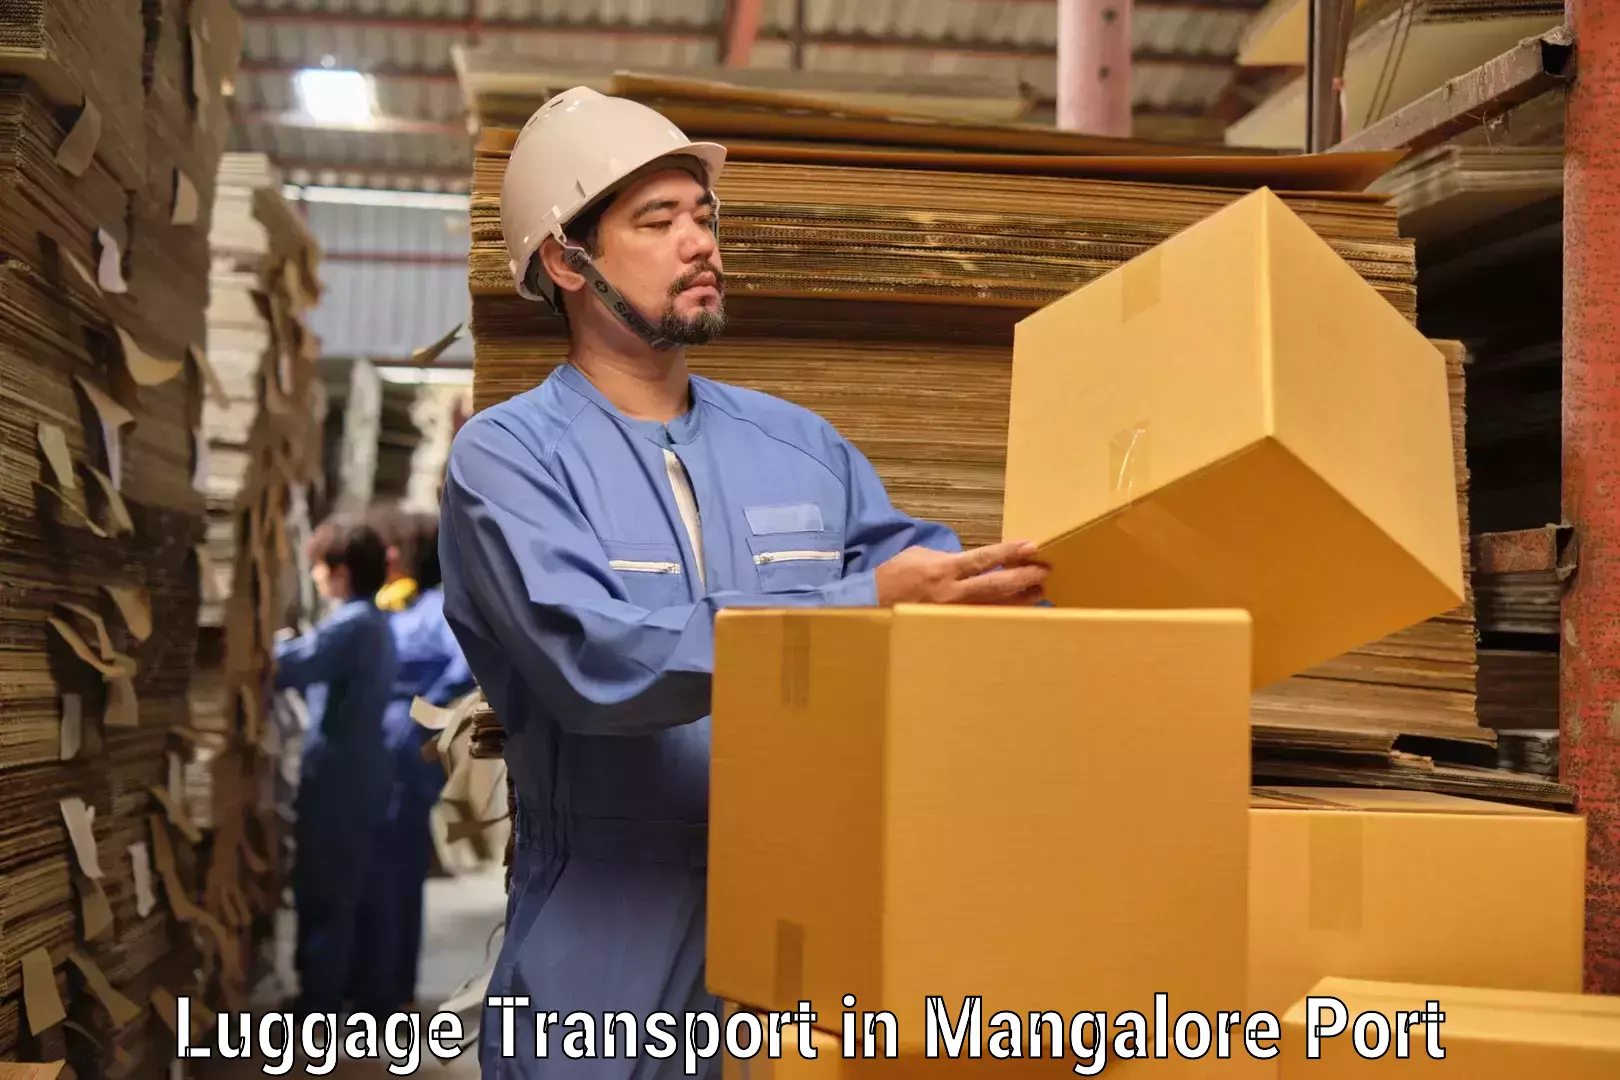 Luggage shipping options in Mangalore Port